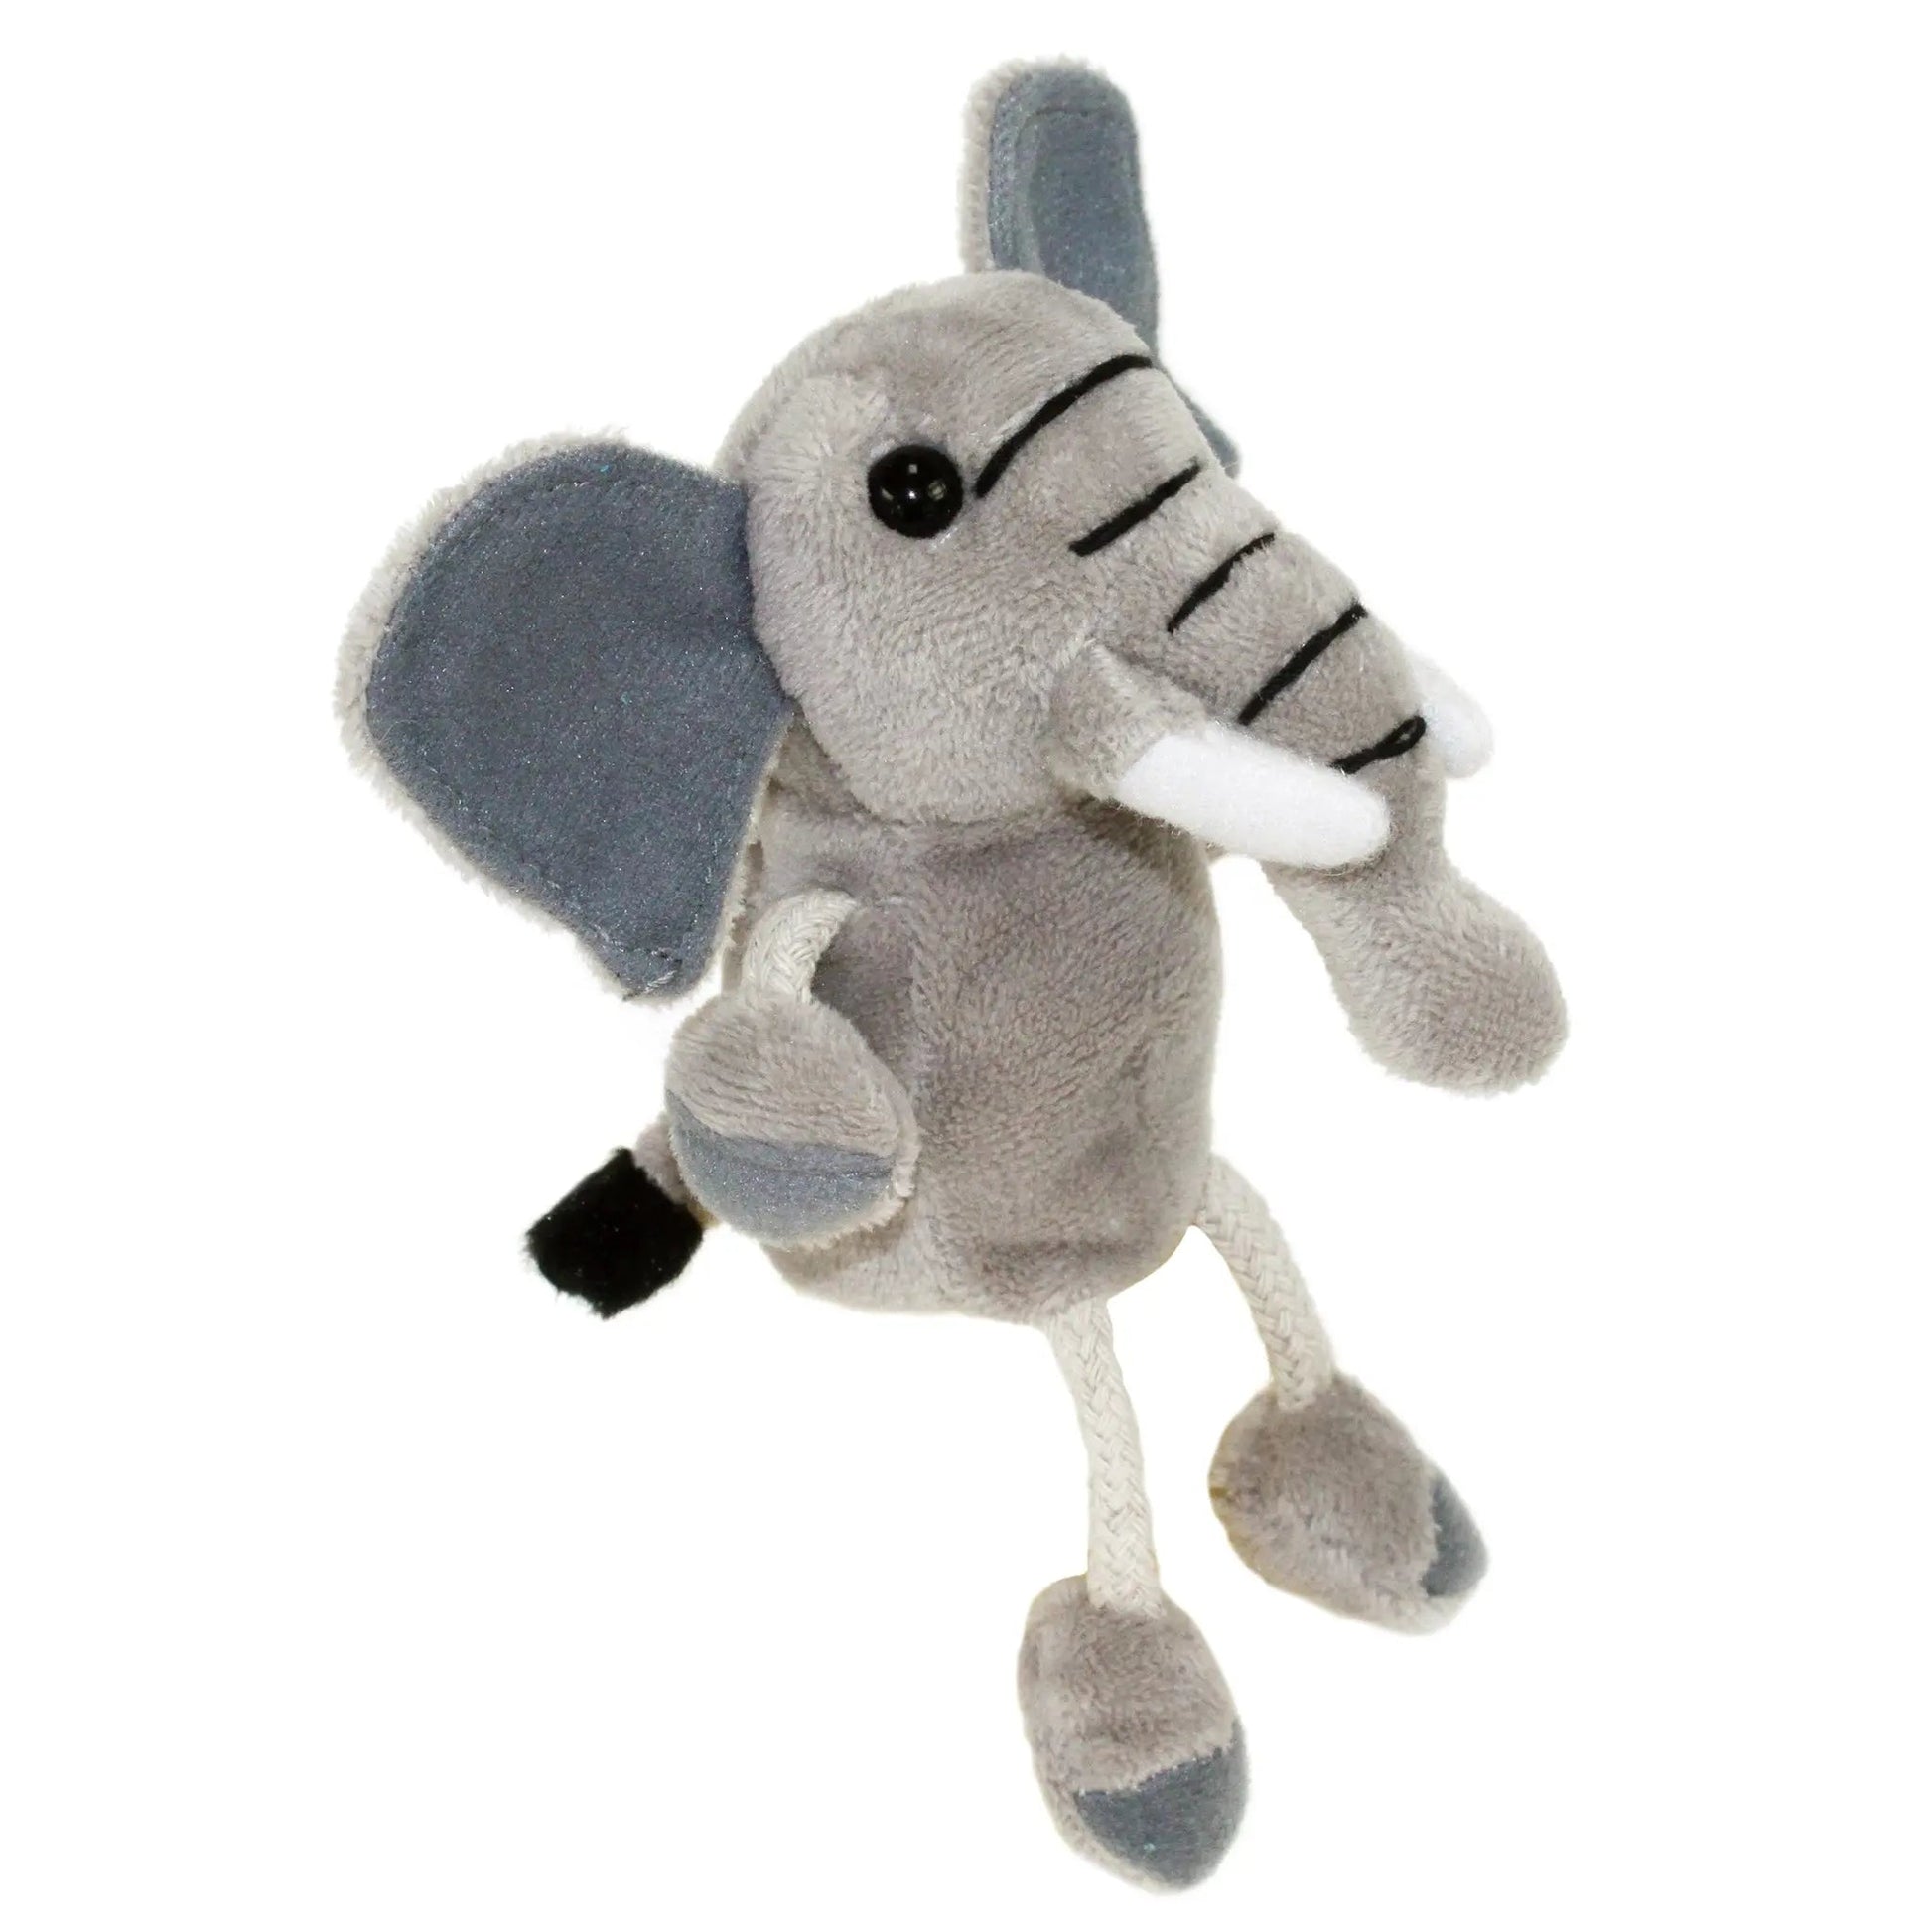 Elephant Finger Puppet - The Puppet Company - The Forgotten Toy Shop